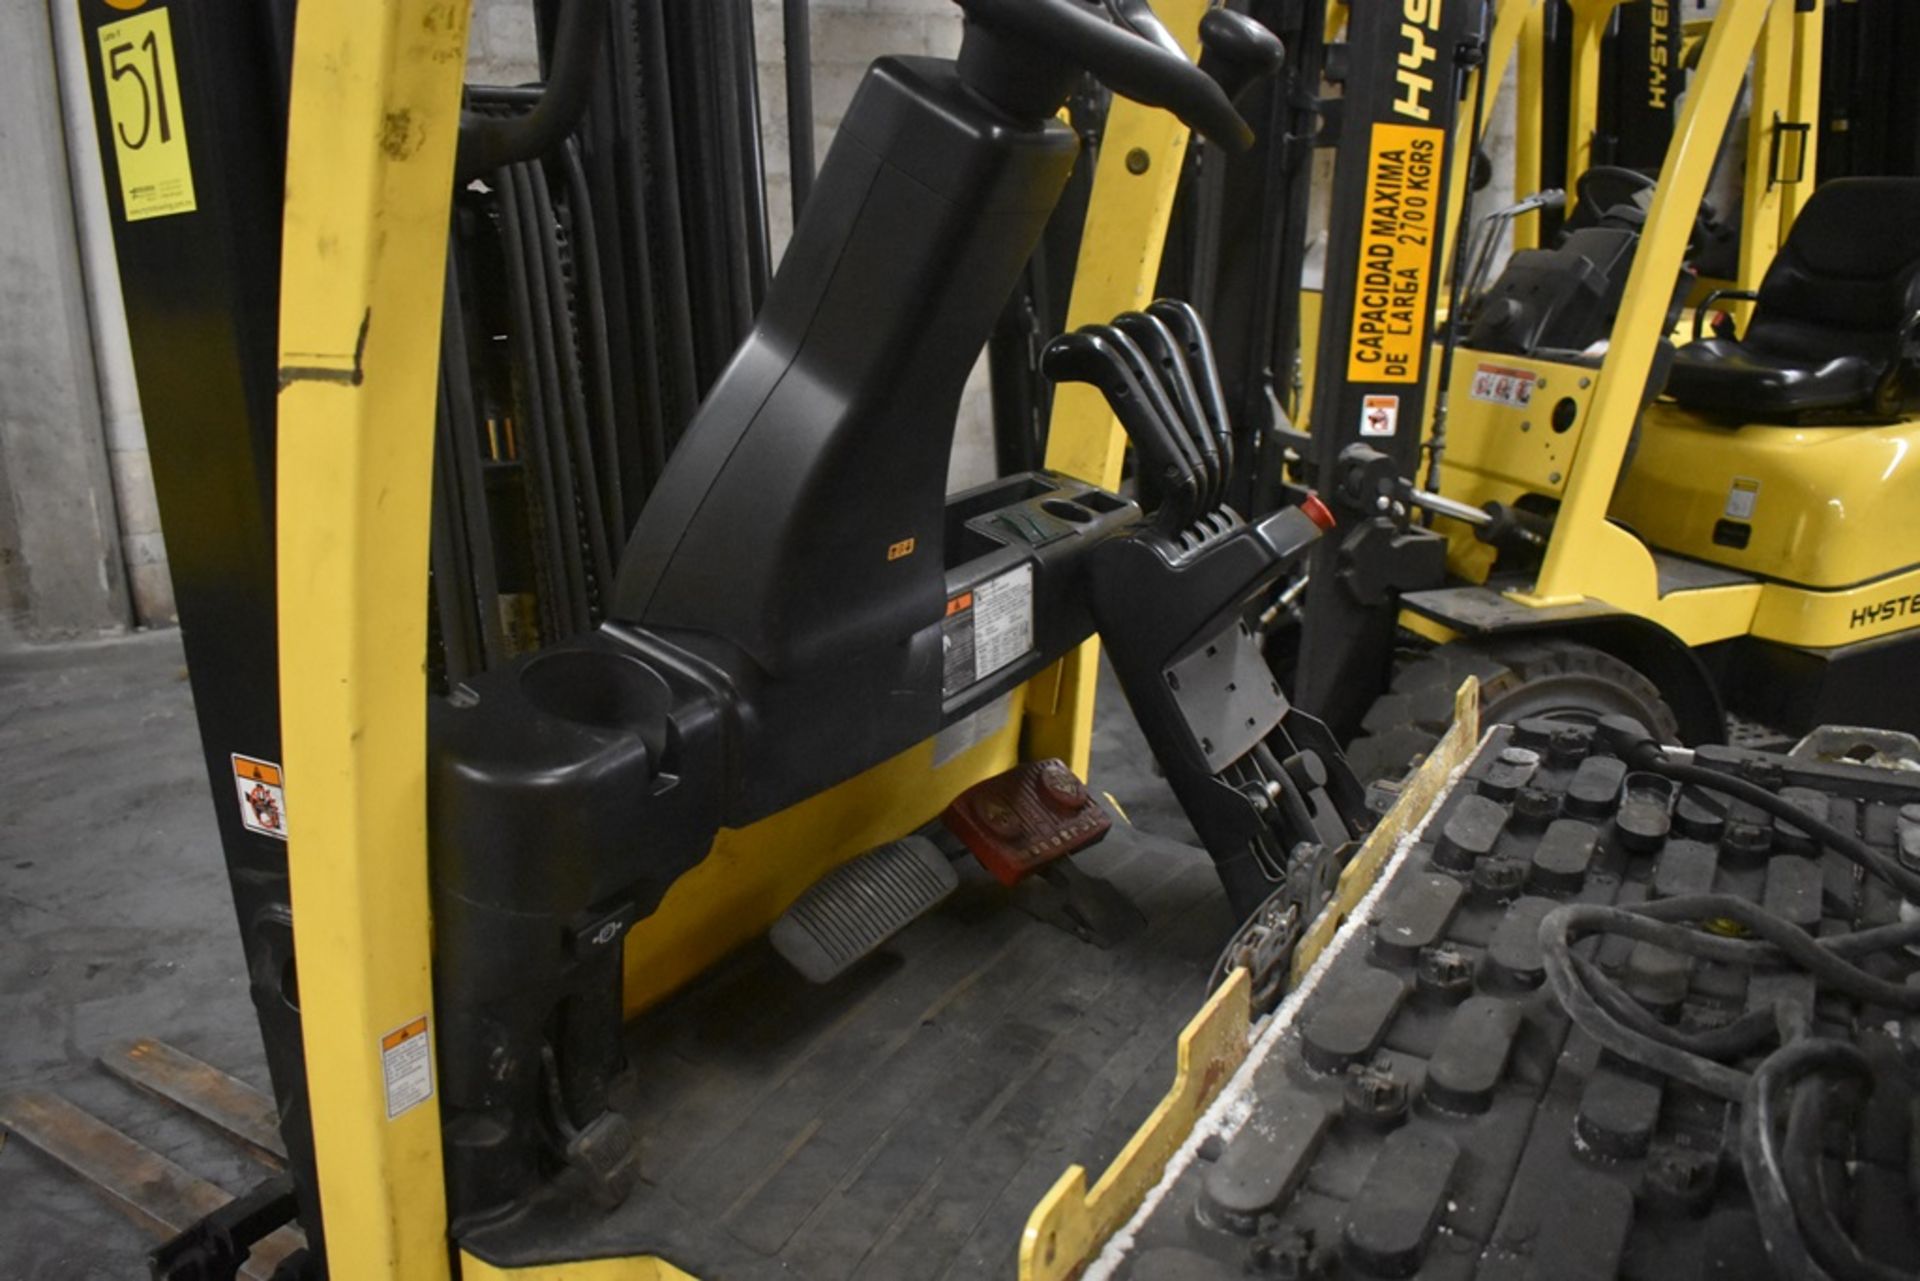 Hyster Electric Forklift, Model E50XN-27, S/N A268N20128P, Year 2016, 4750 lb Capacity - Image 39 of 44